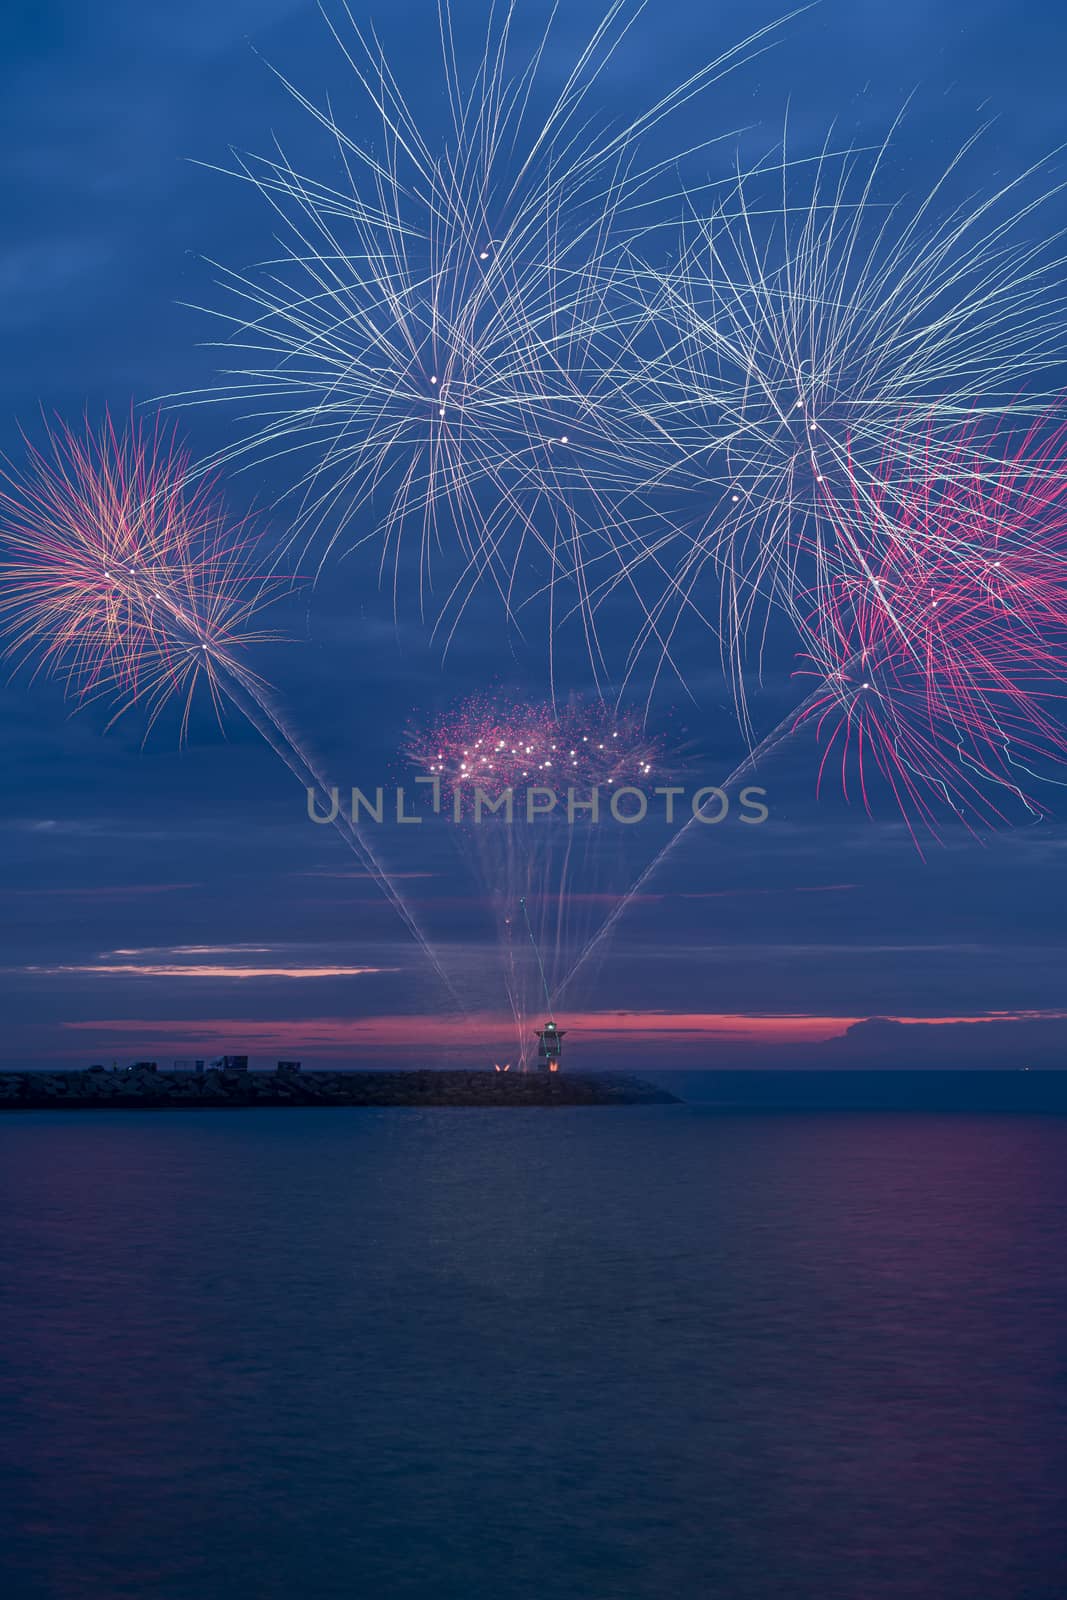 Fireworks launch at the pier of the Scheveningen harbor celebrating the Tall Ship Regatta in The Hague, Netherlands by ankorlight